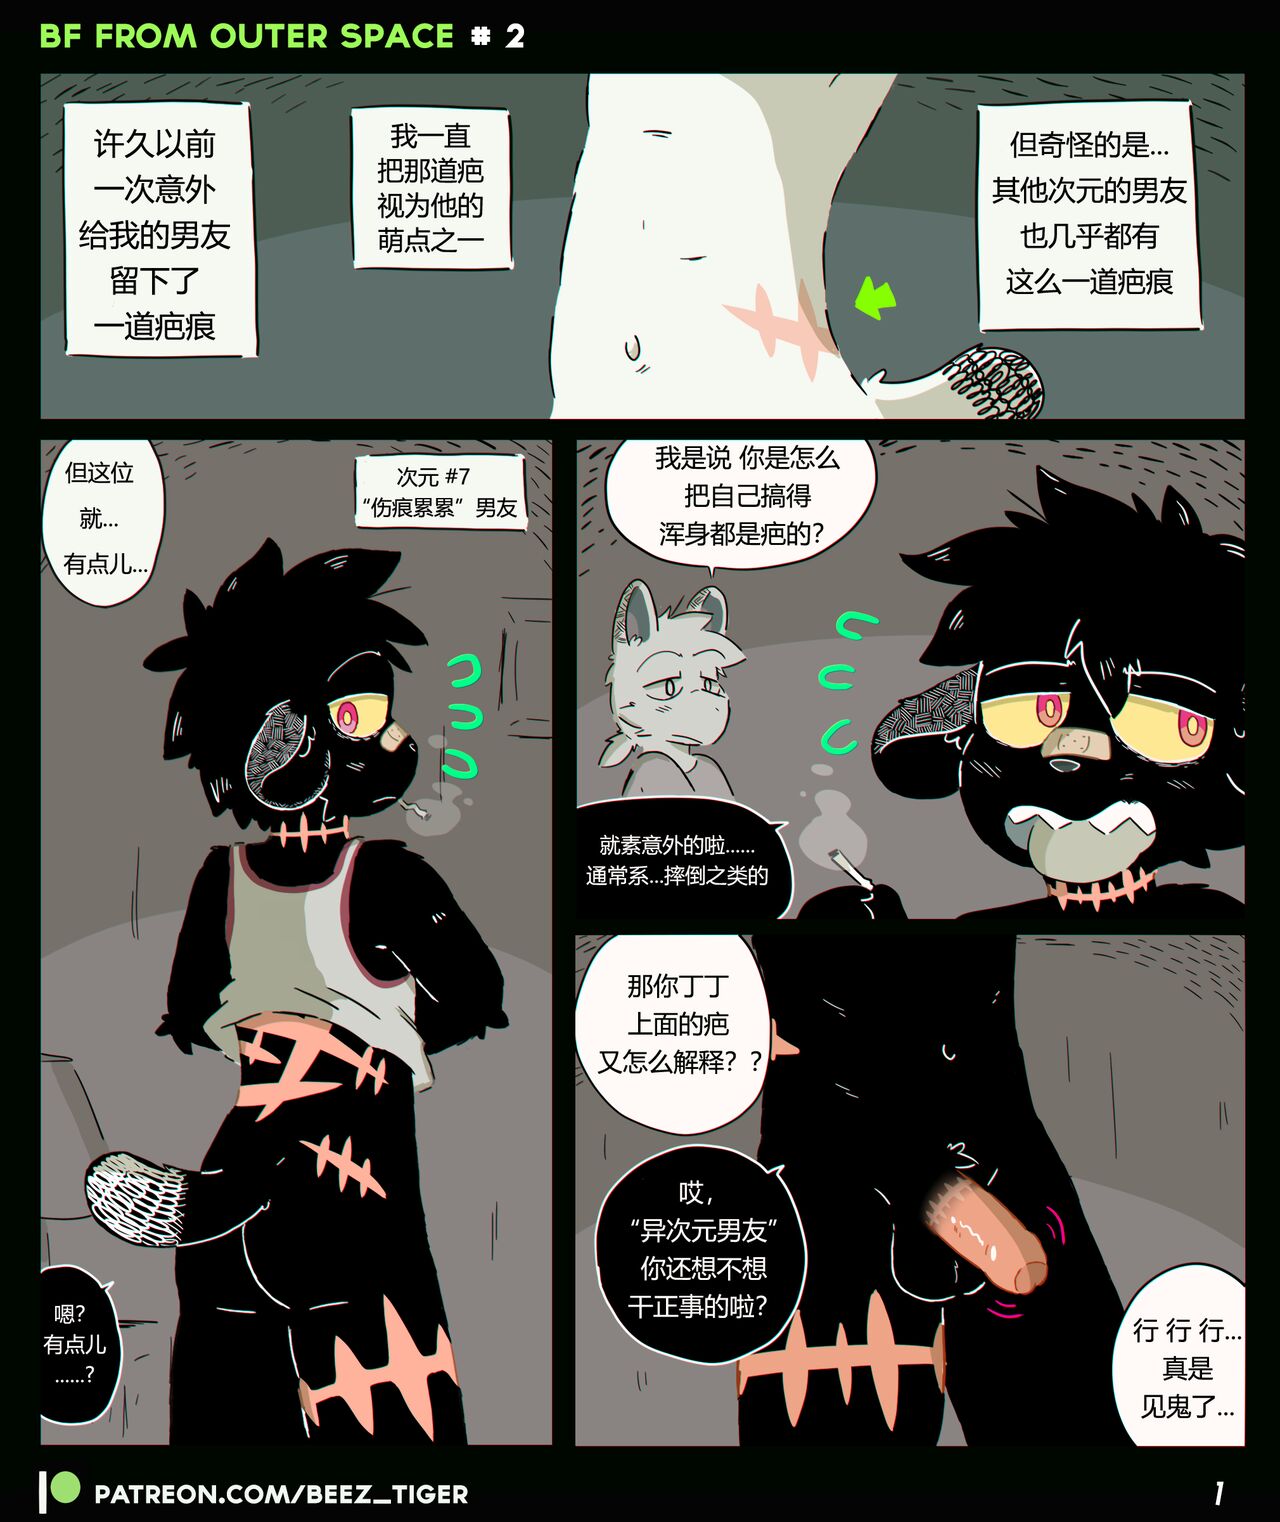 [foxxx321 Beez] BF from Outer Space | 异次元男友  (Chinese)(ONGOING) (KAZE汉化) 